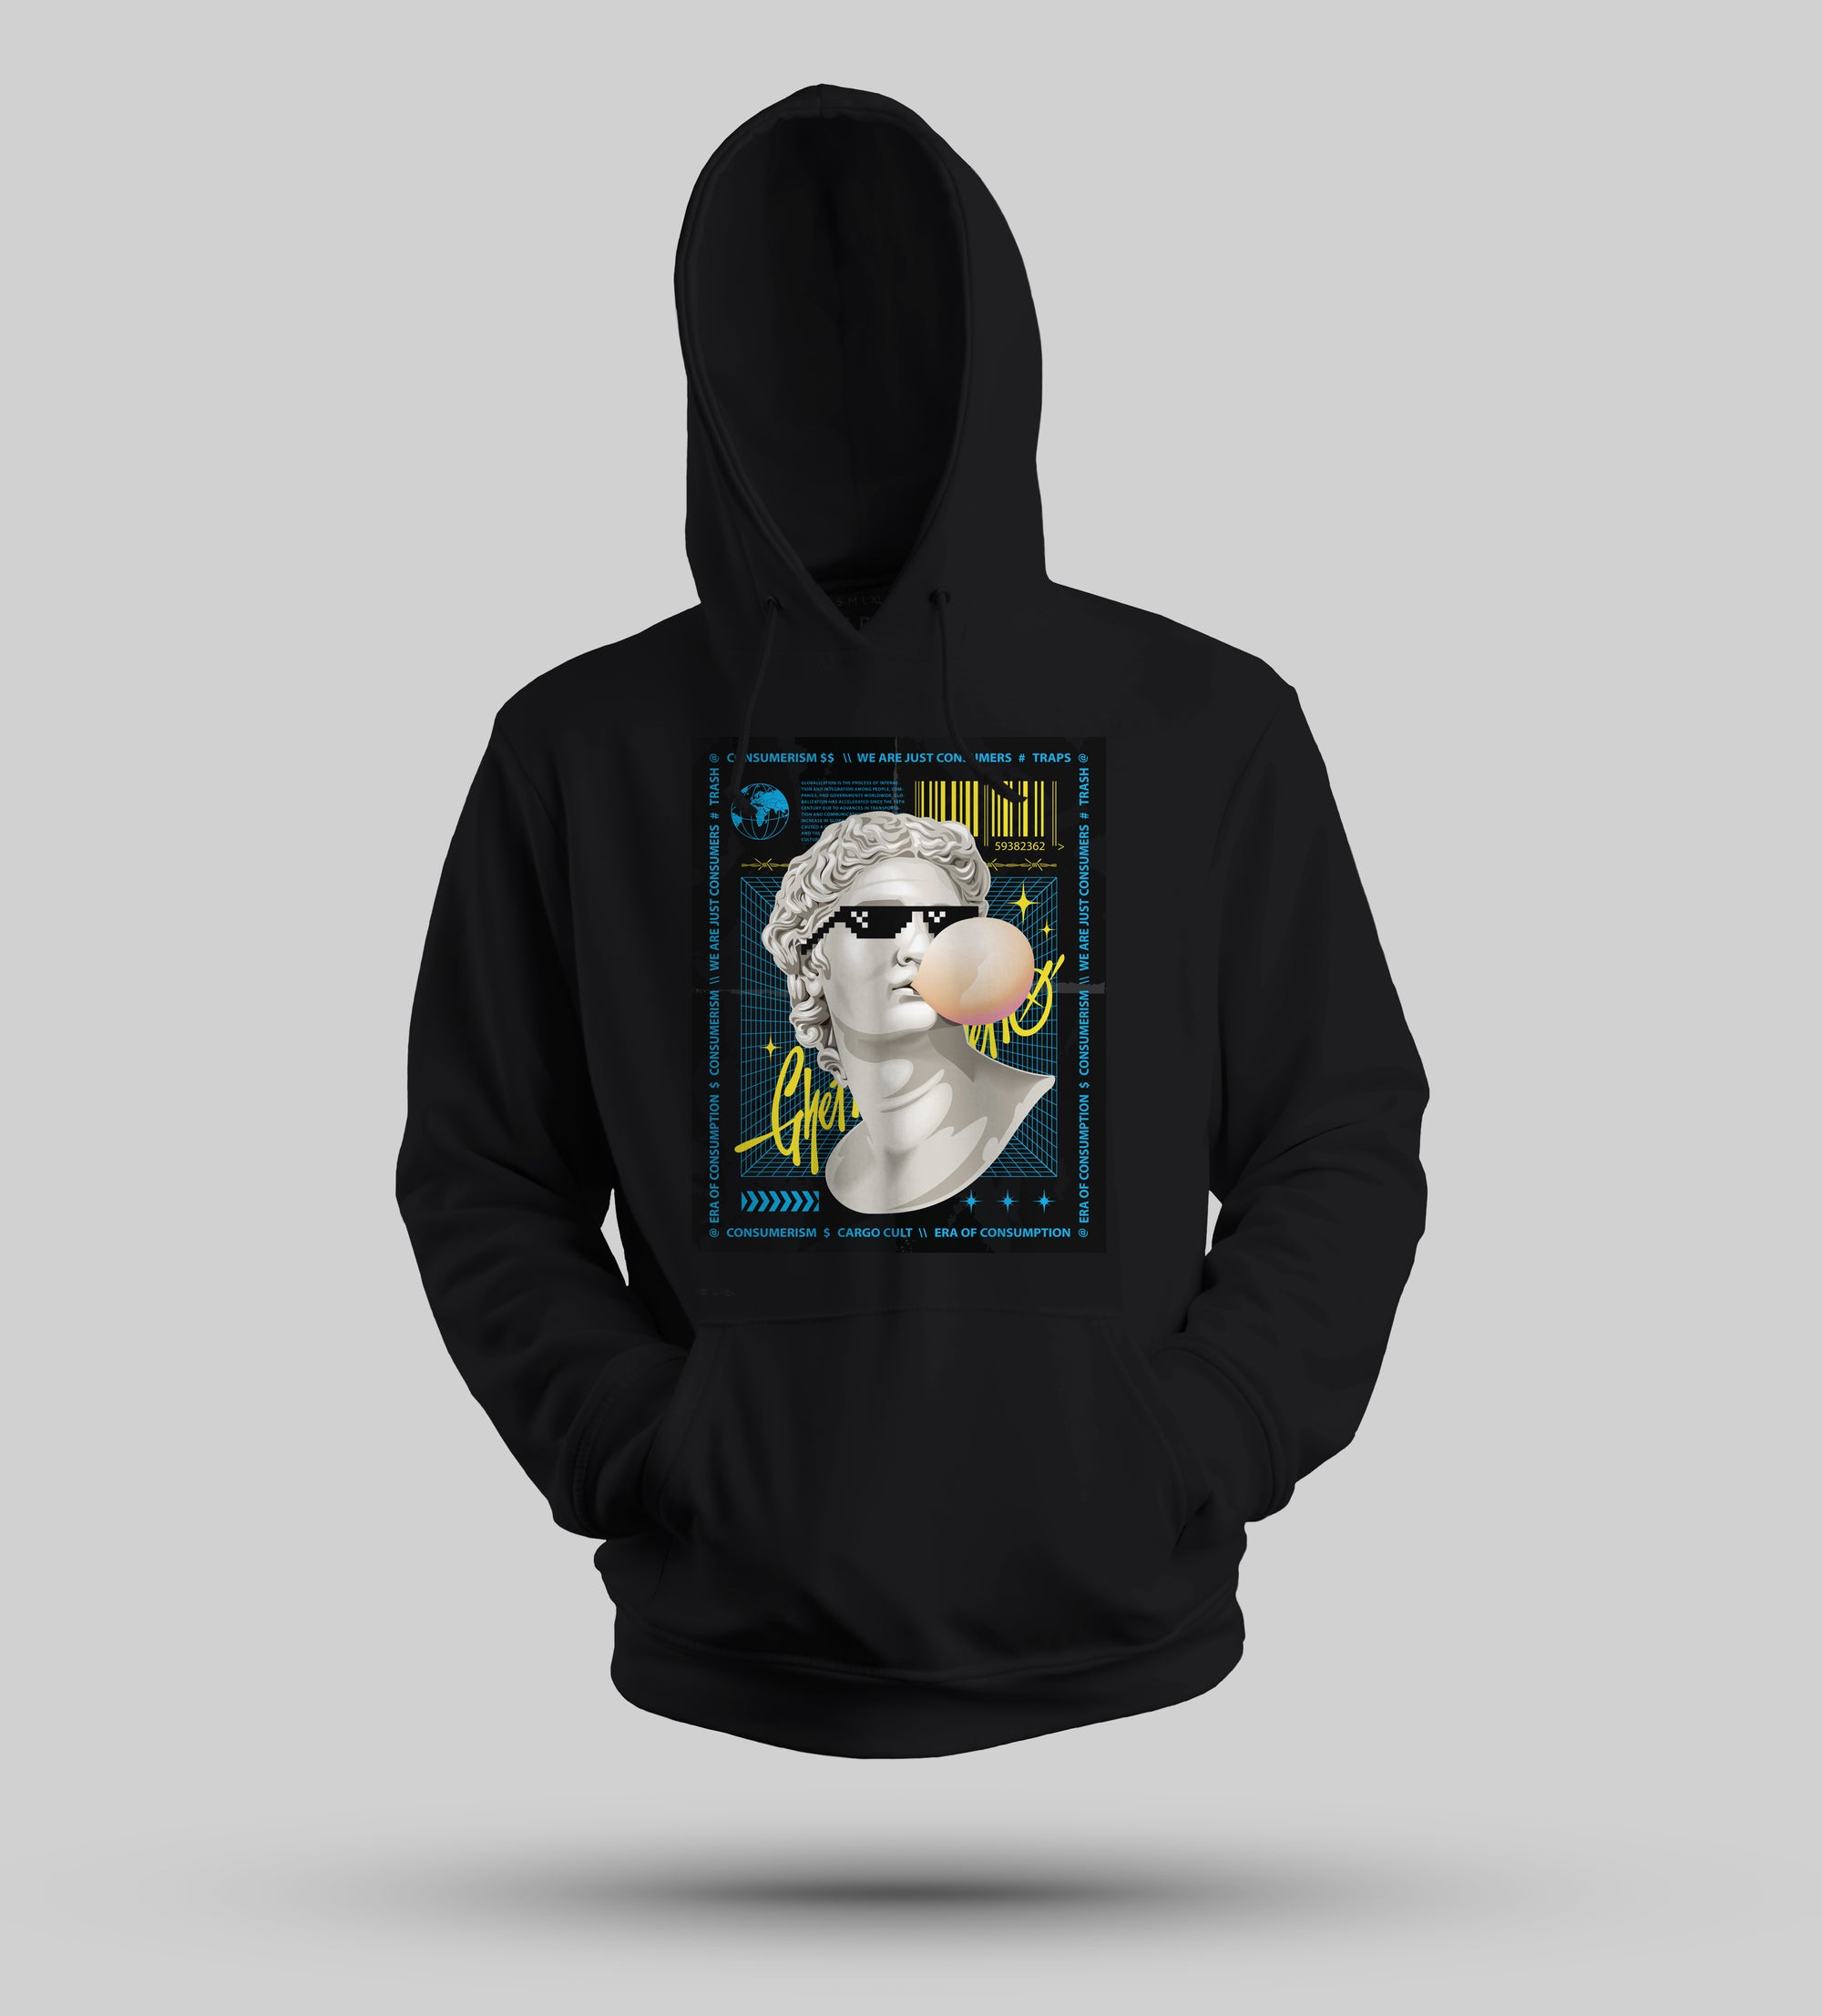 Artistic-hoodie-for women